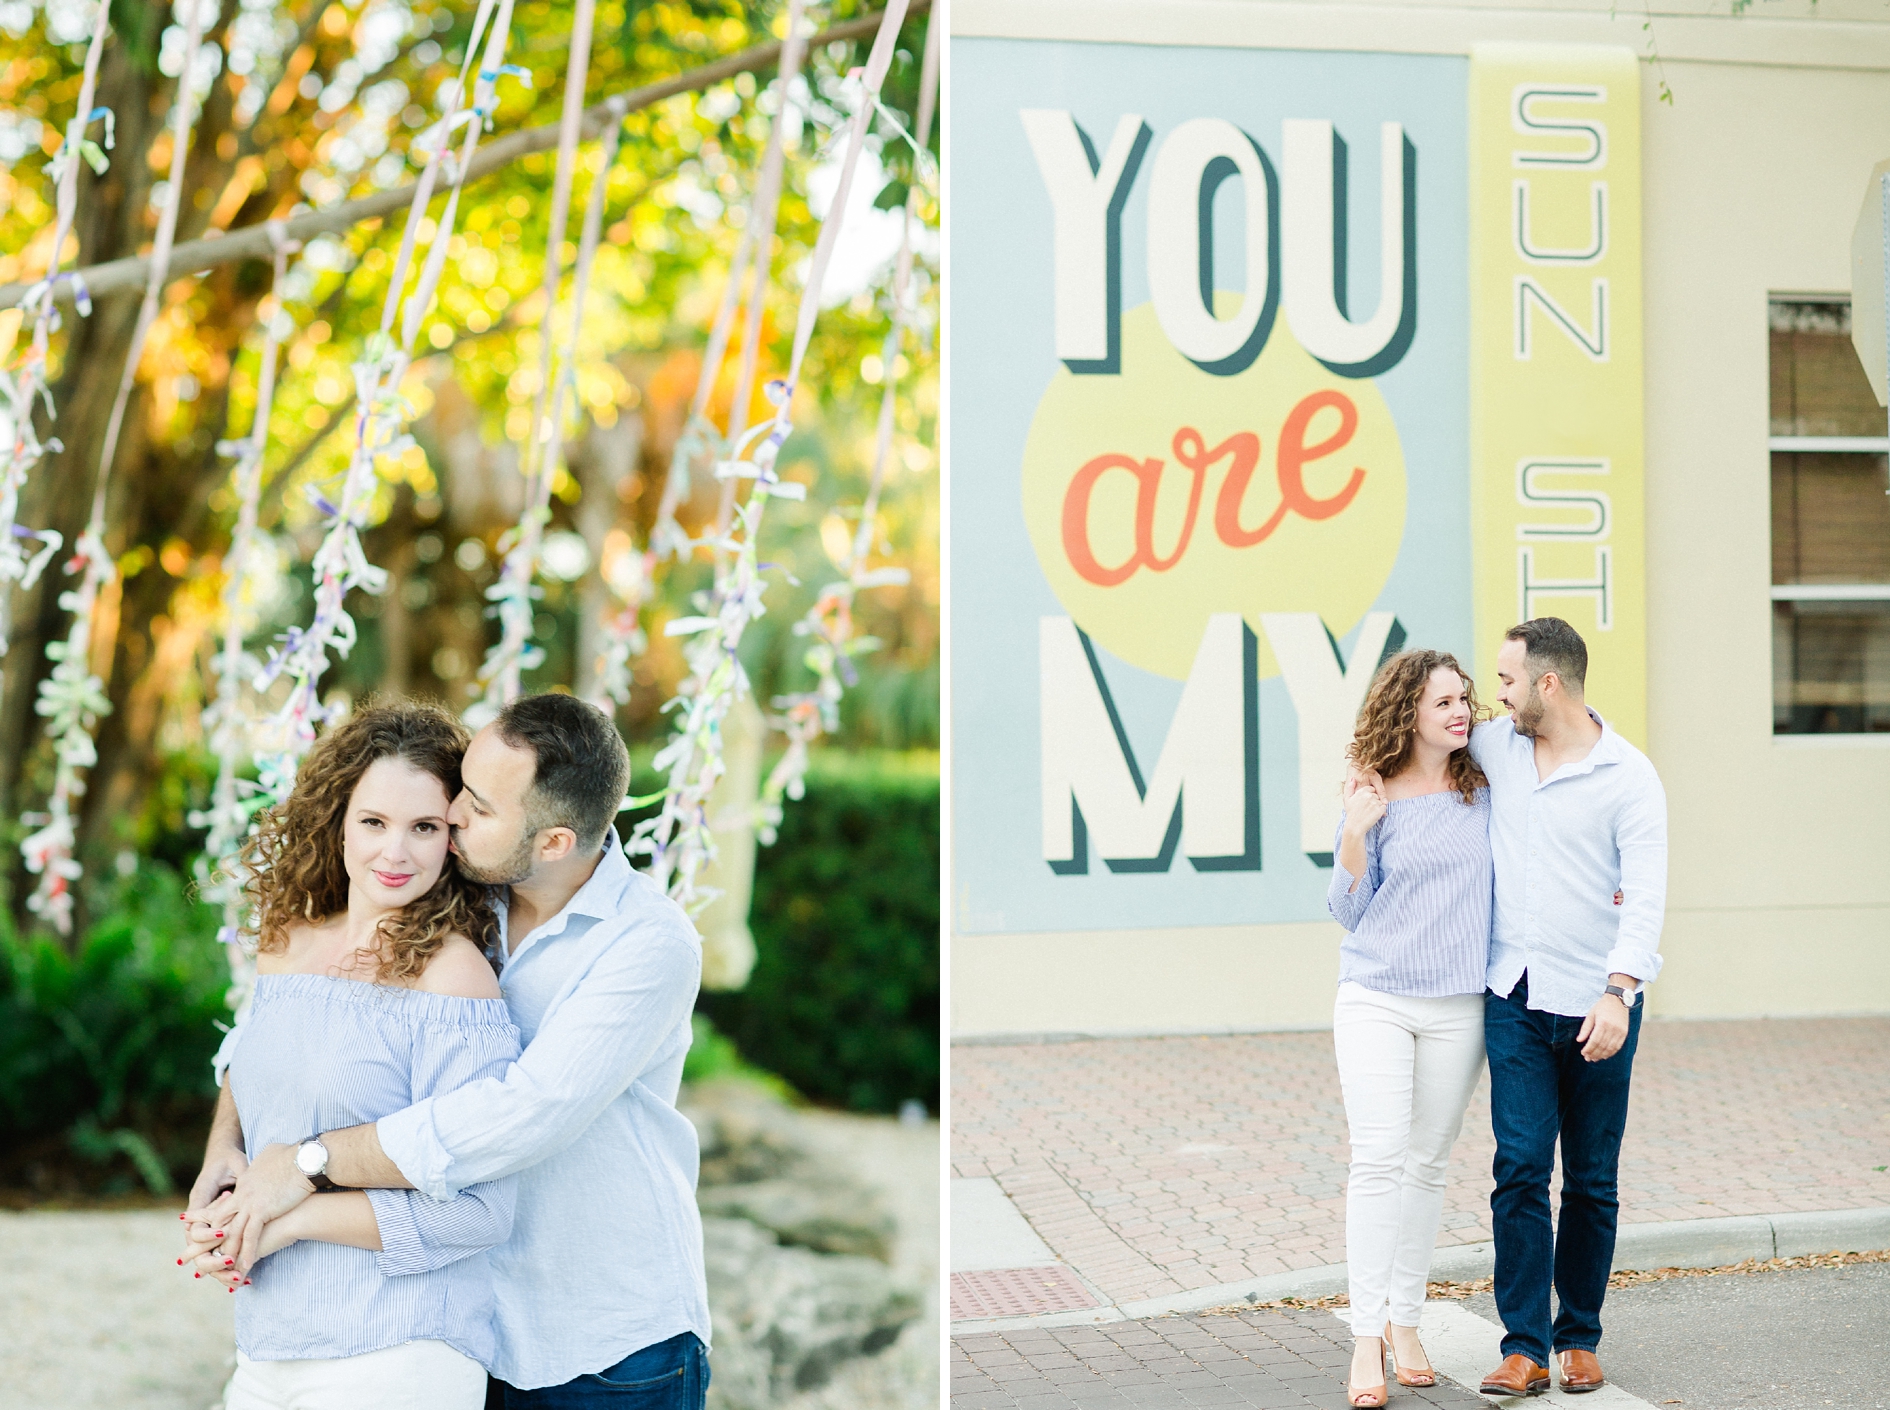 Straub Park Engagement | @ Ailyn La Torre Photography 2017